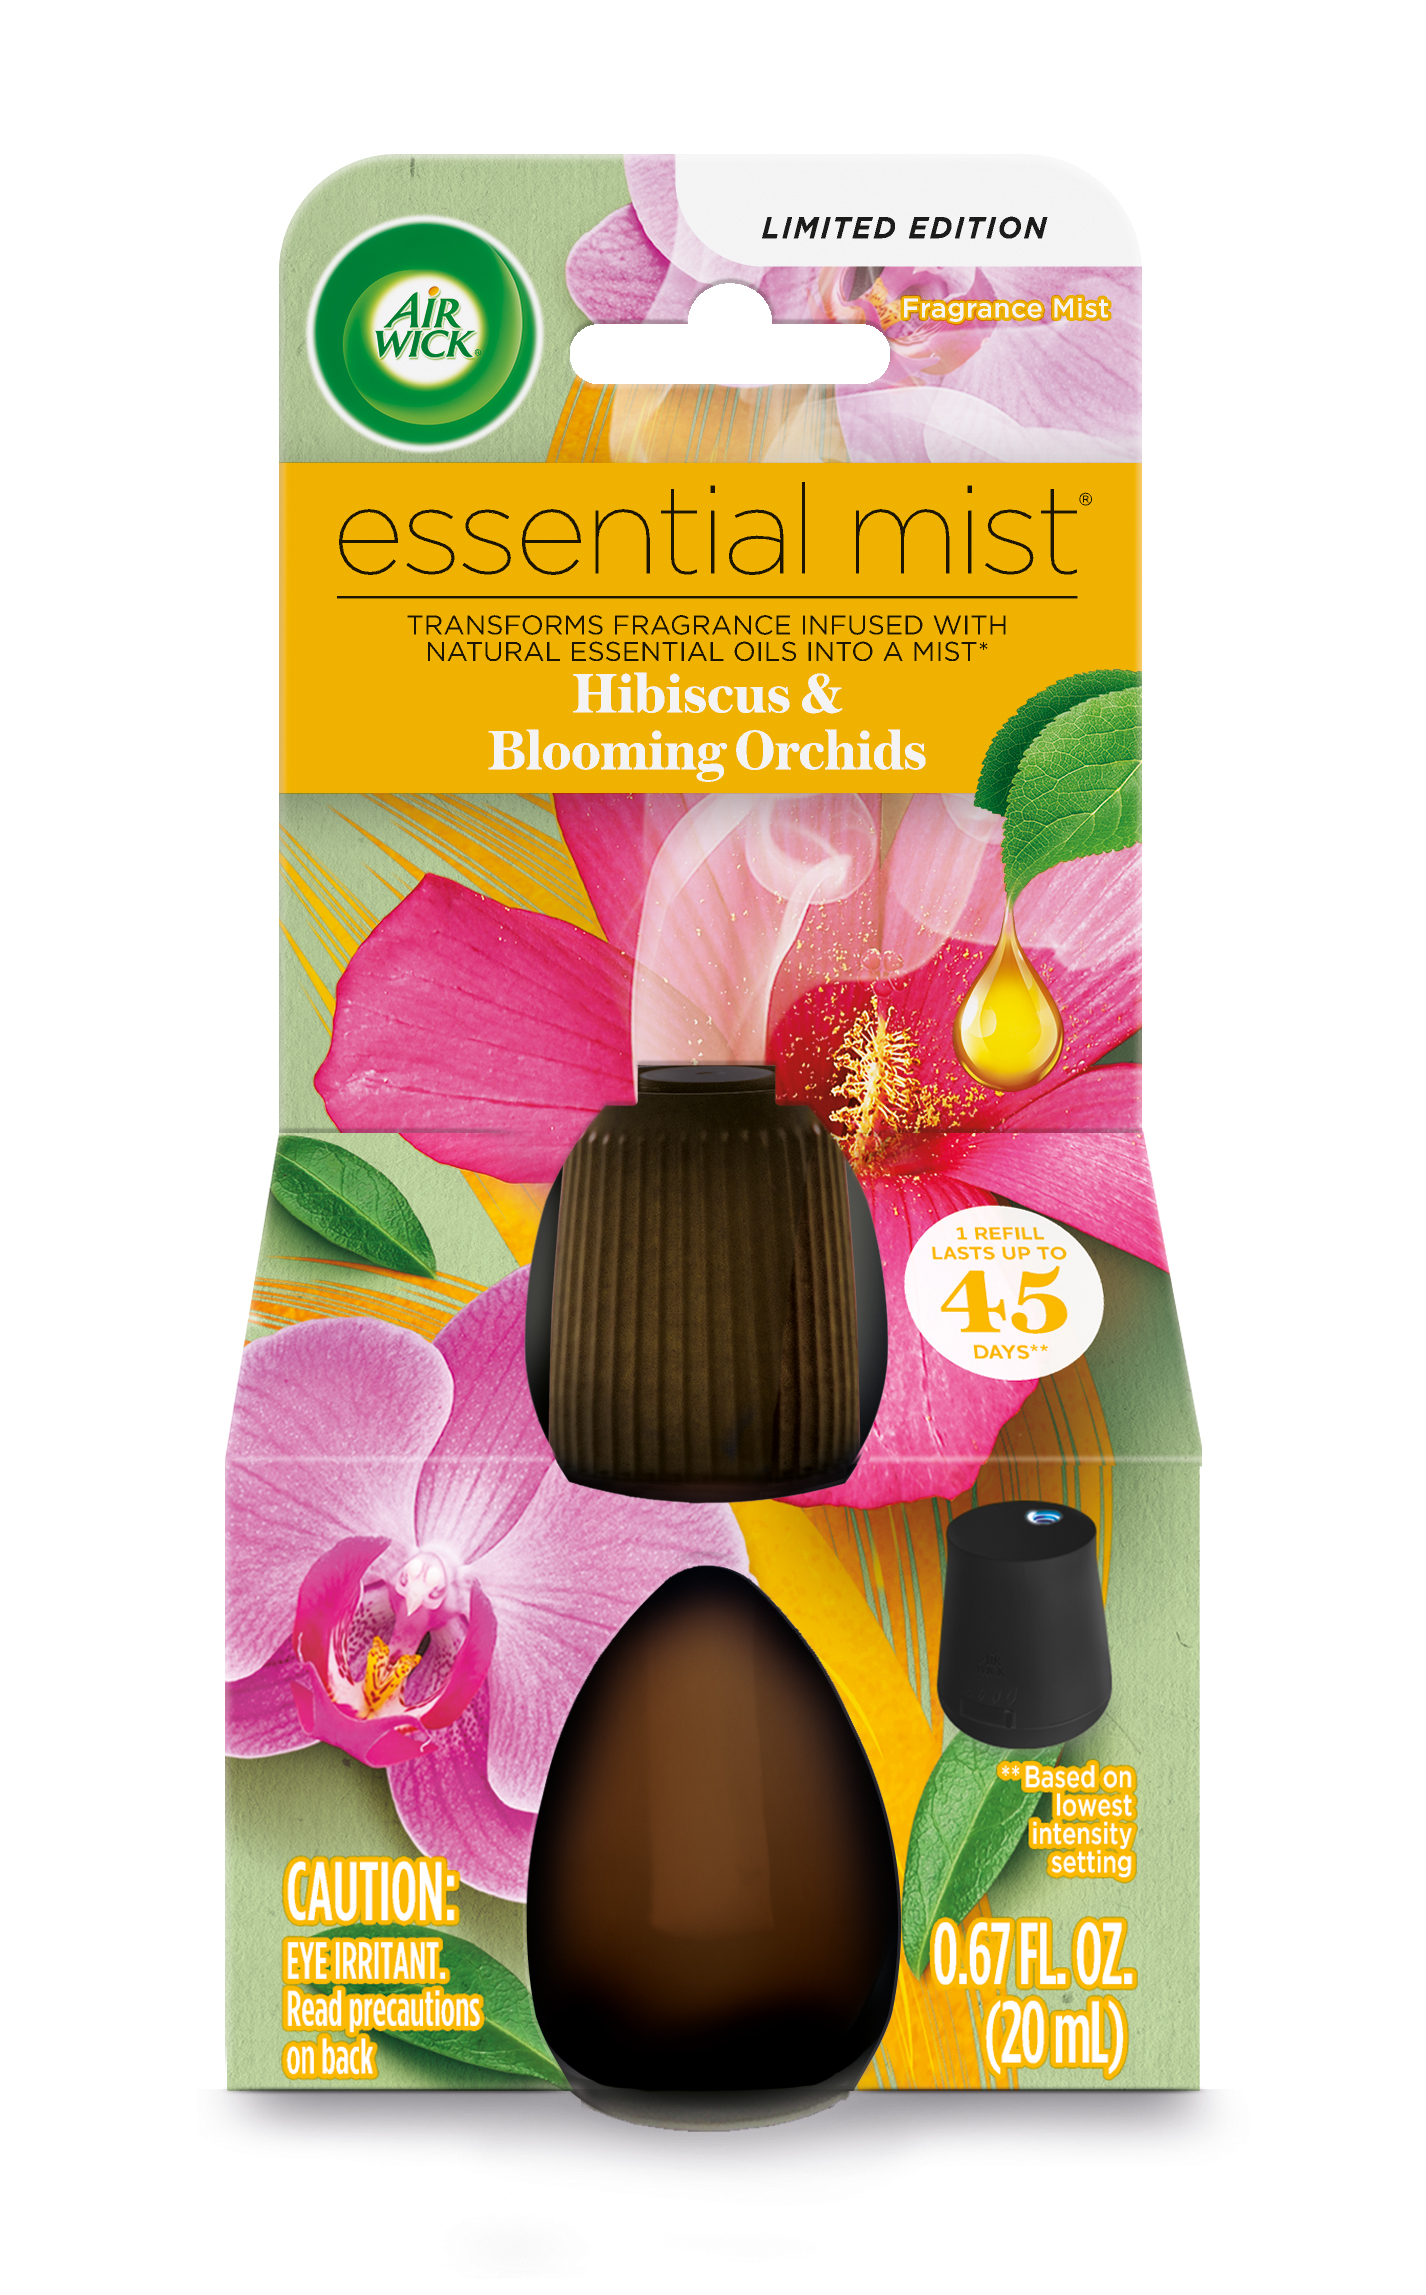 AIR WICK® Essential Mist - Hibiscus & Blooming Orchids (Discontinued)